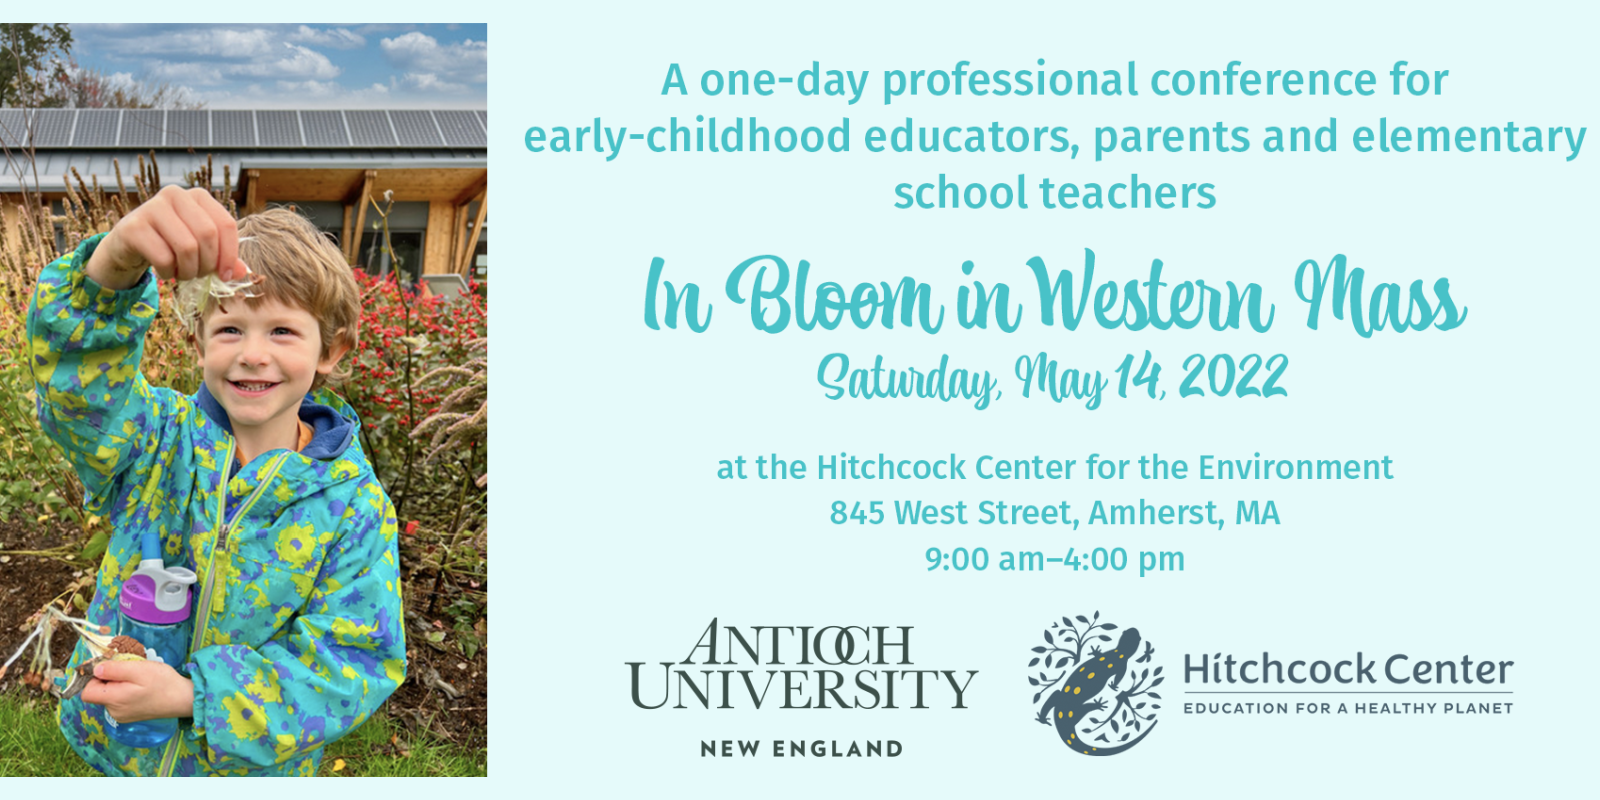 In Bloom in Western Mass, Saturday, May 14, 2022, Hitchcock Center for the Environment, is a full day conference for educators and parents of preschool–third grade students. 